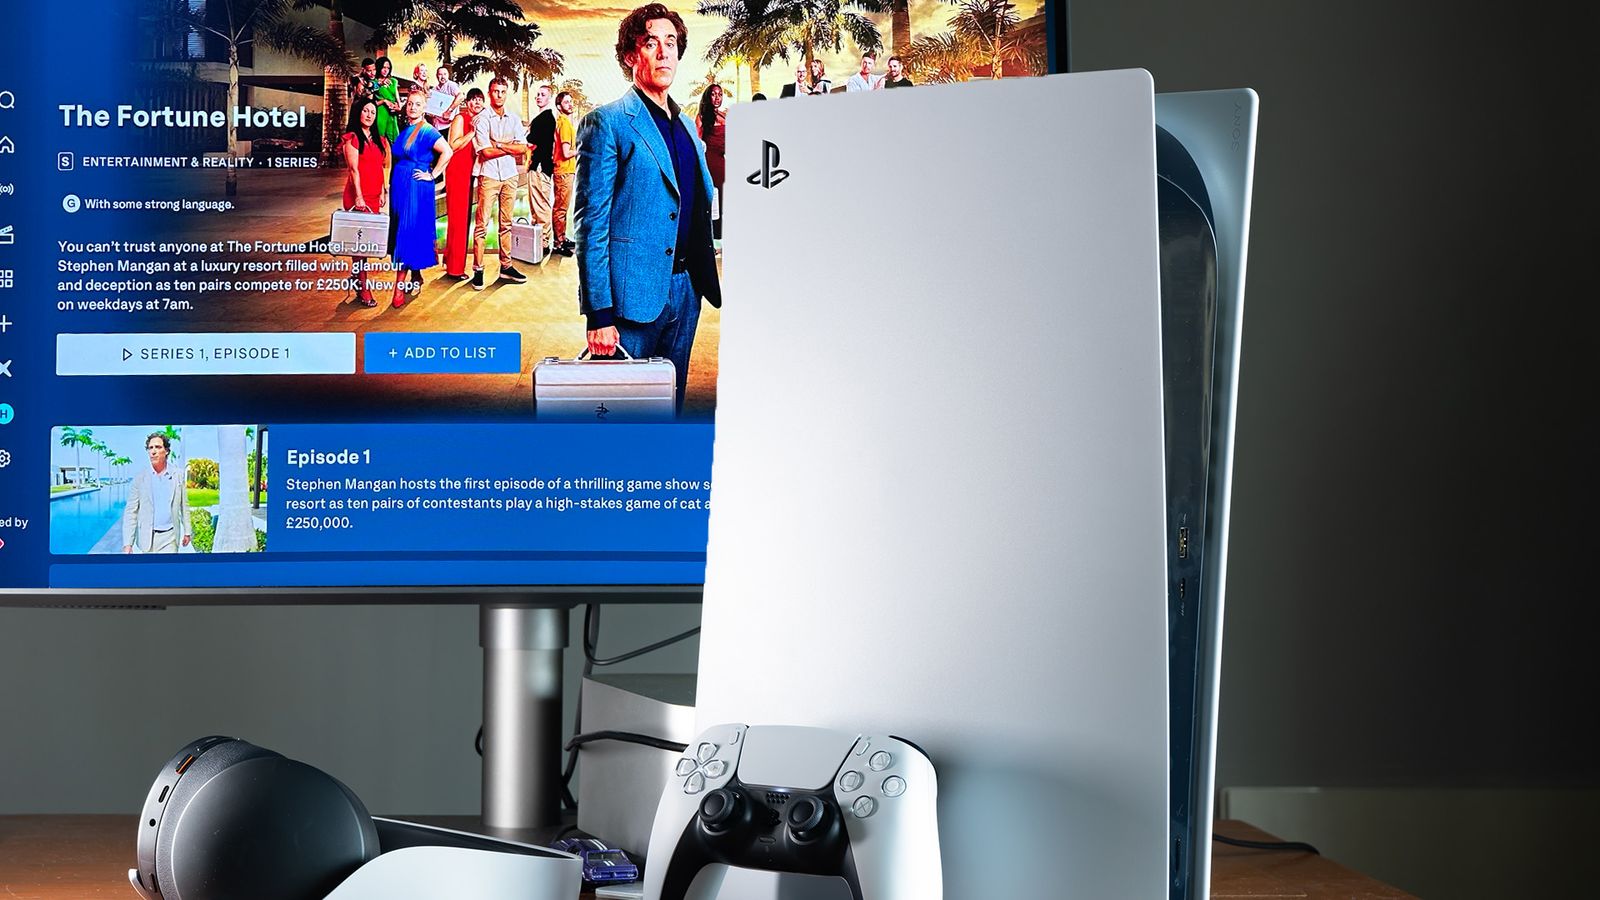 Playstation in front of a TV showing 'The Fortune Hotel' screen on ITVX - PR image